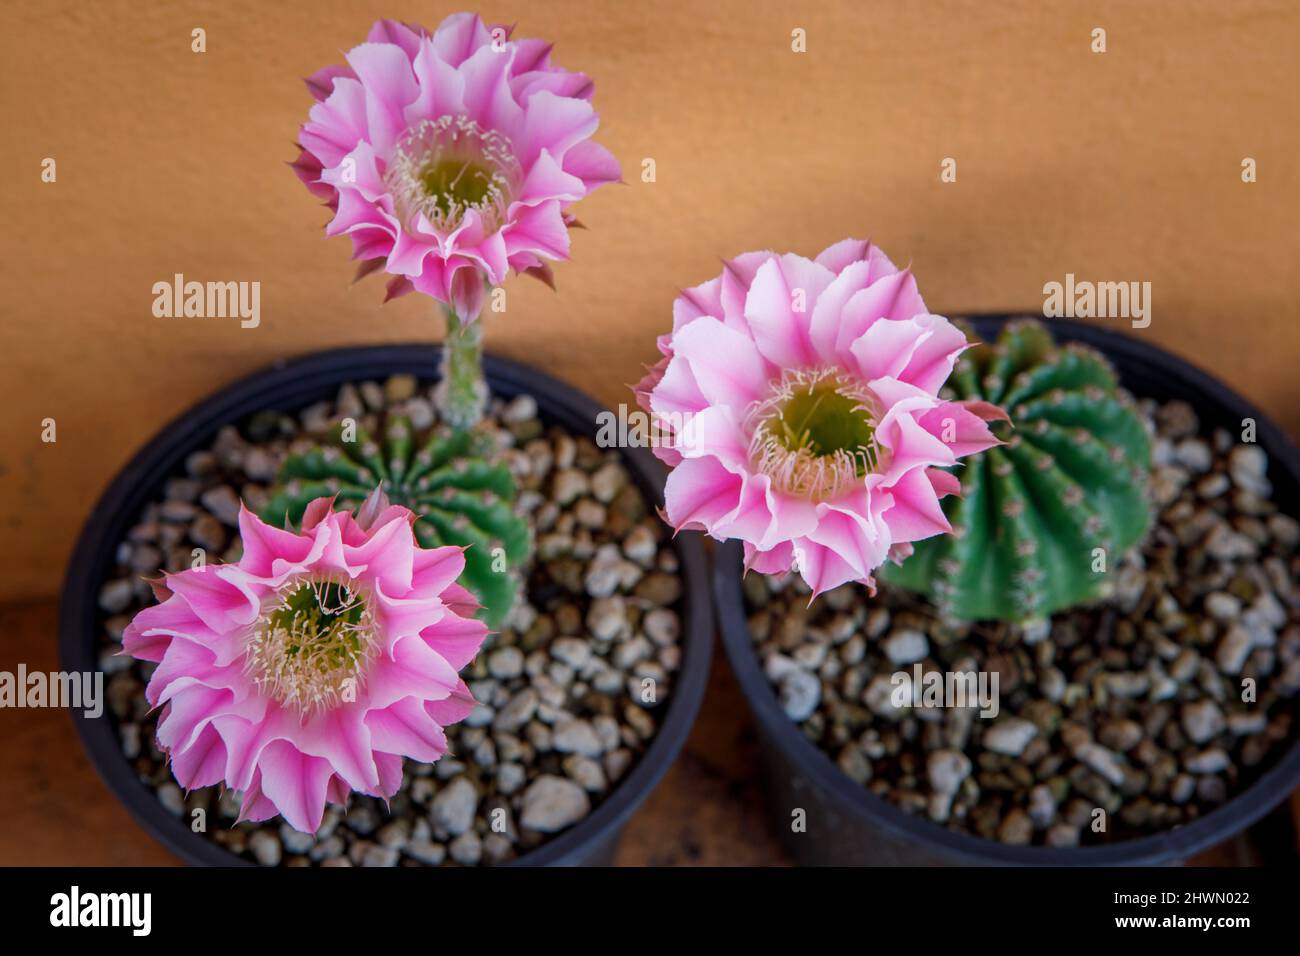 pink flower of echinopsis cactus blooming in planting pot Stock Photo